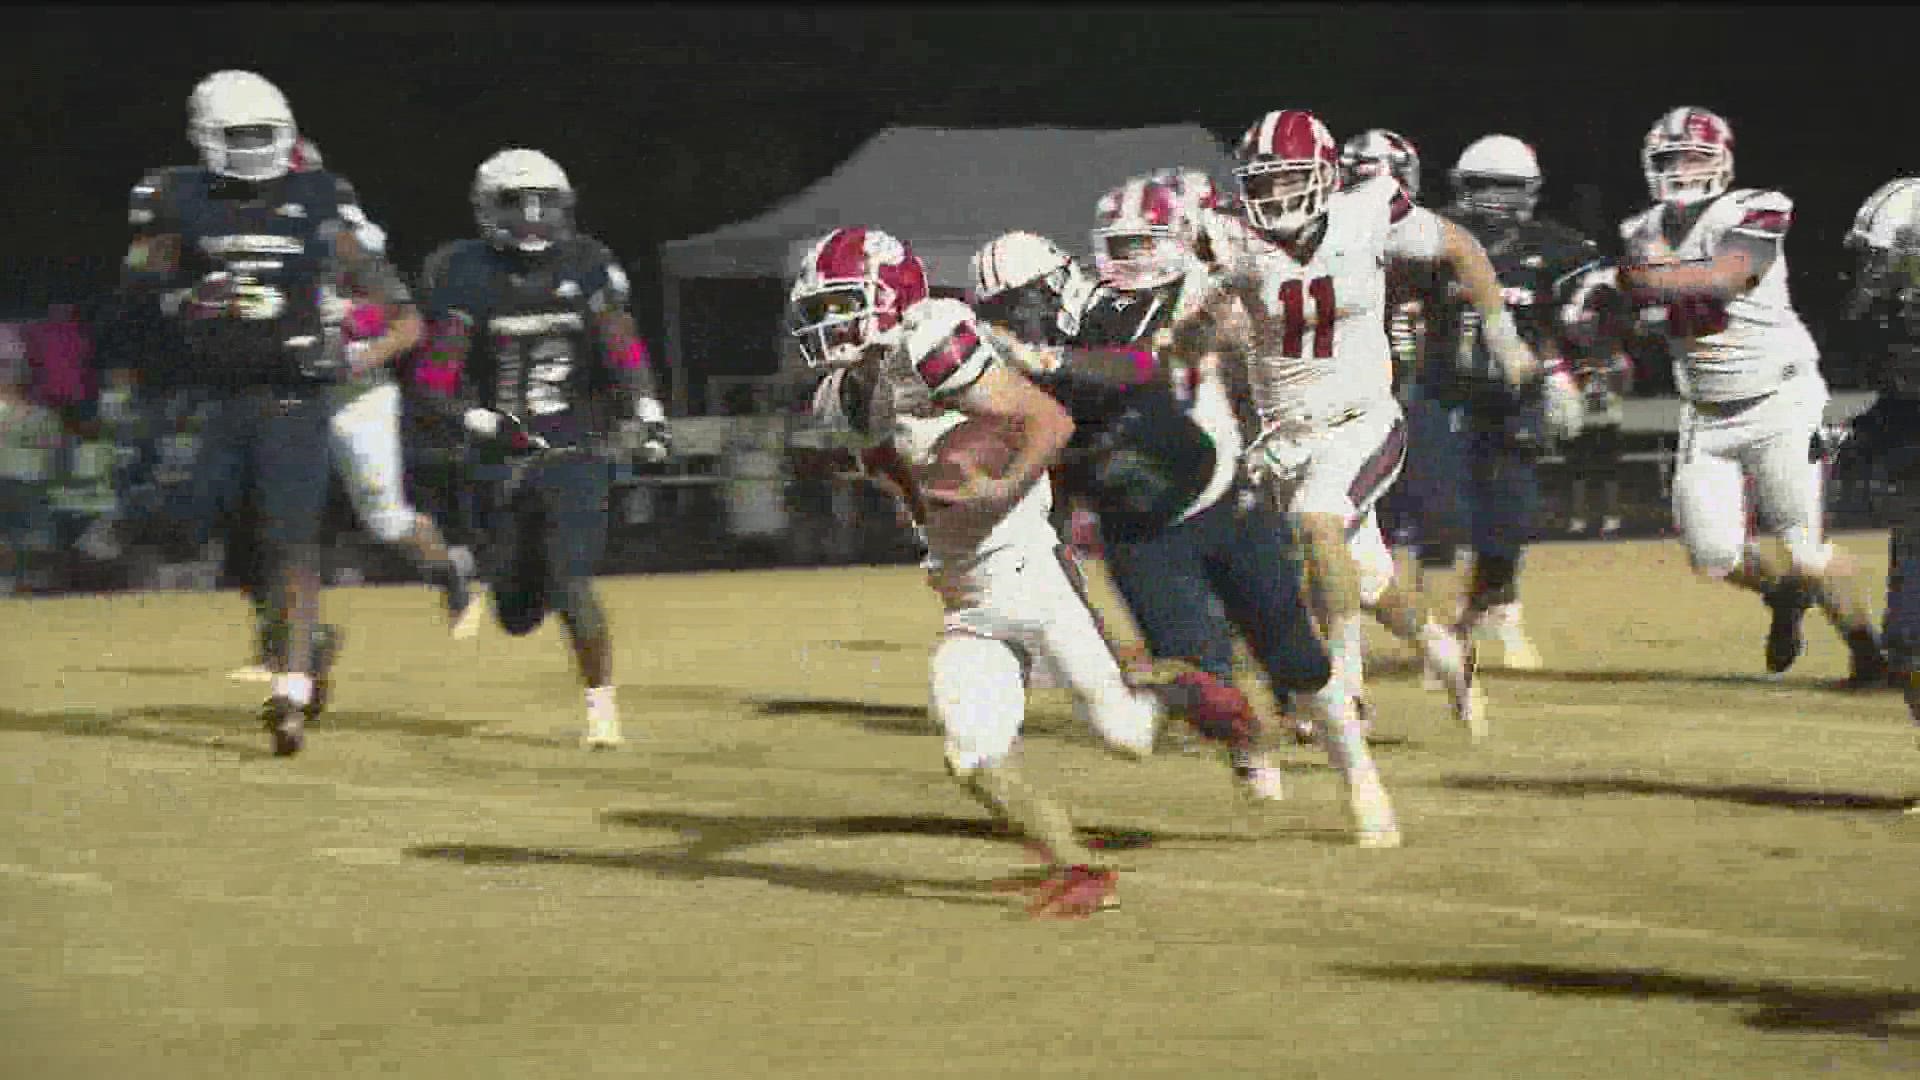 Rabun County remains undefeated with a score of 17-14 against St. Francis.